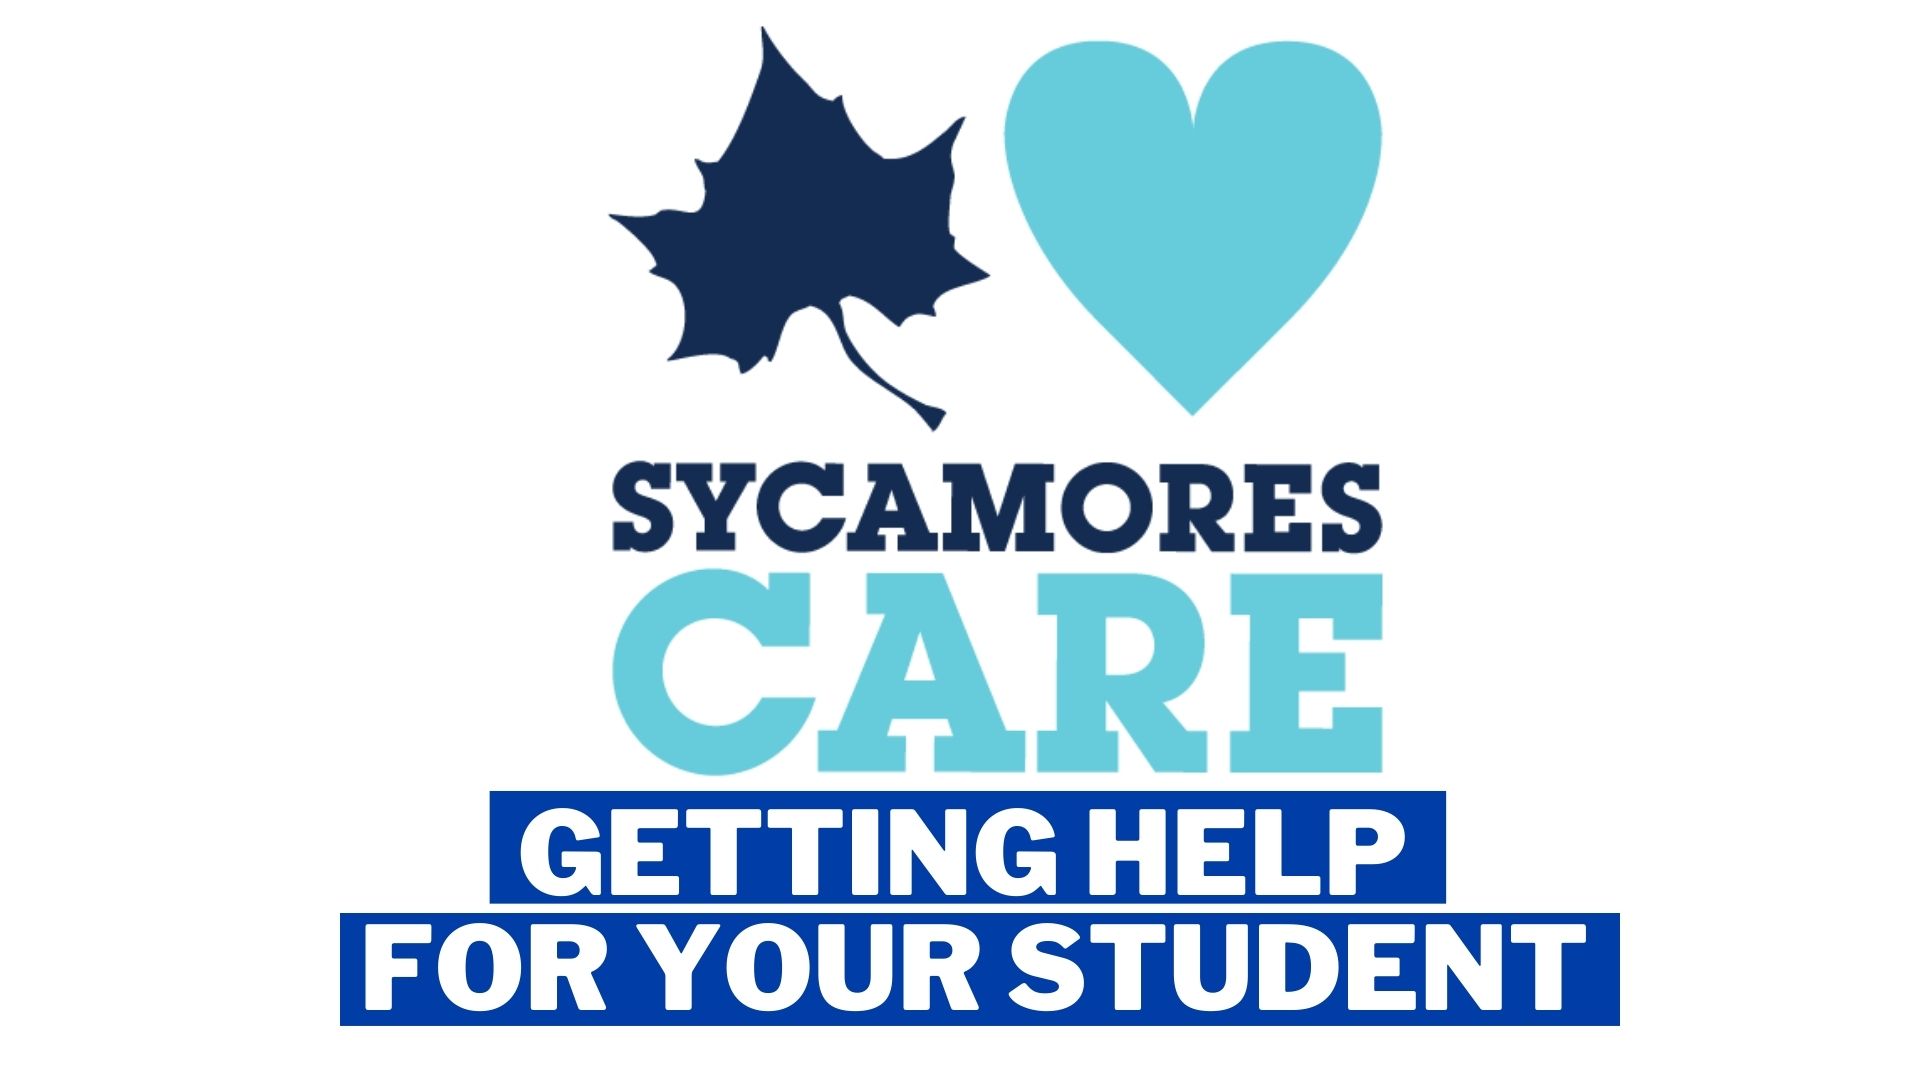 Sycamores Care - Getting Help for Your Student